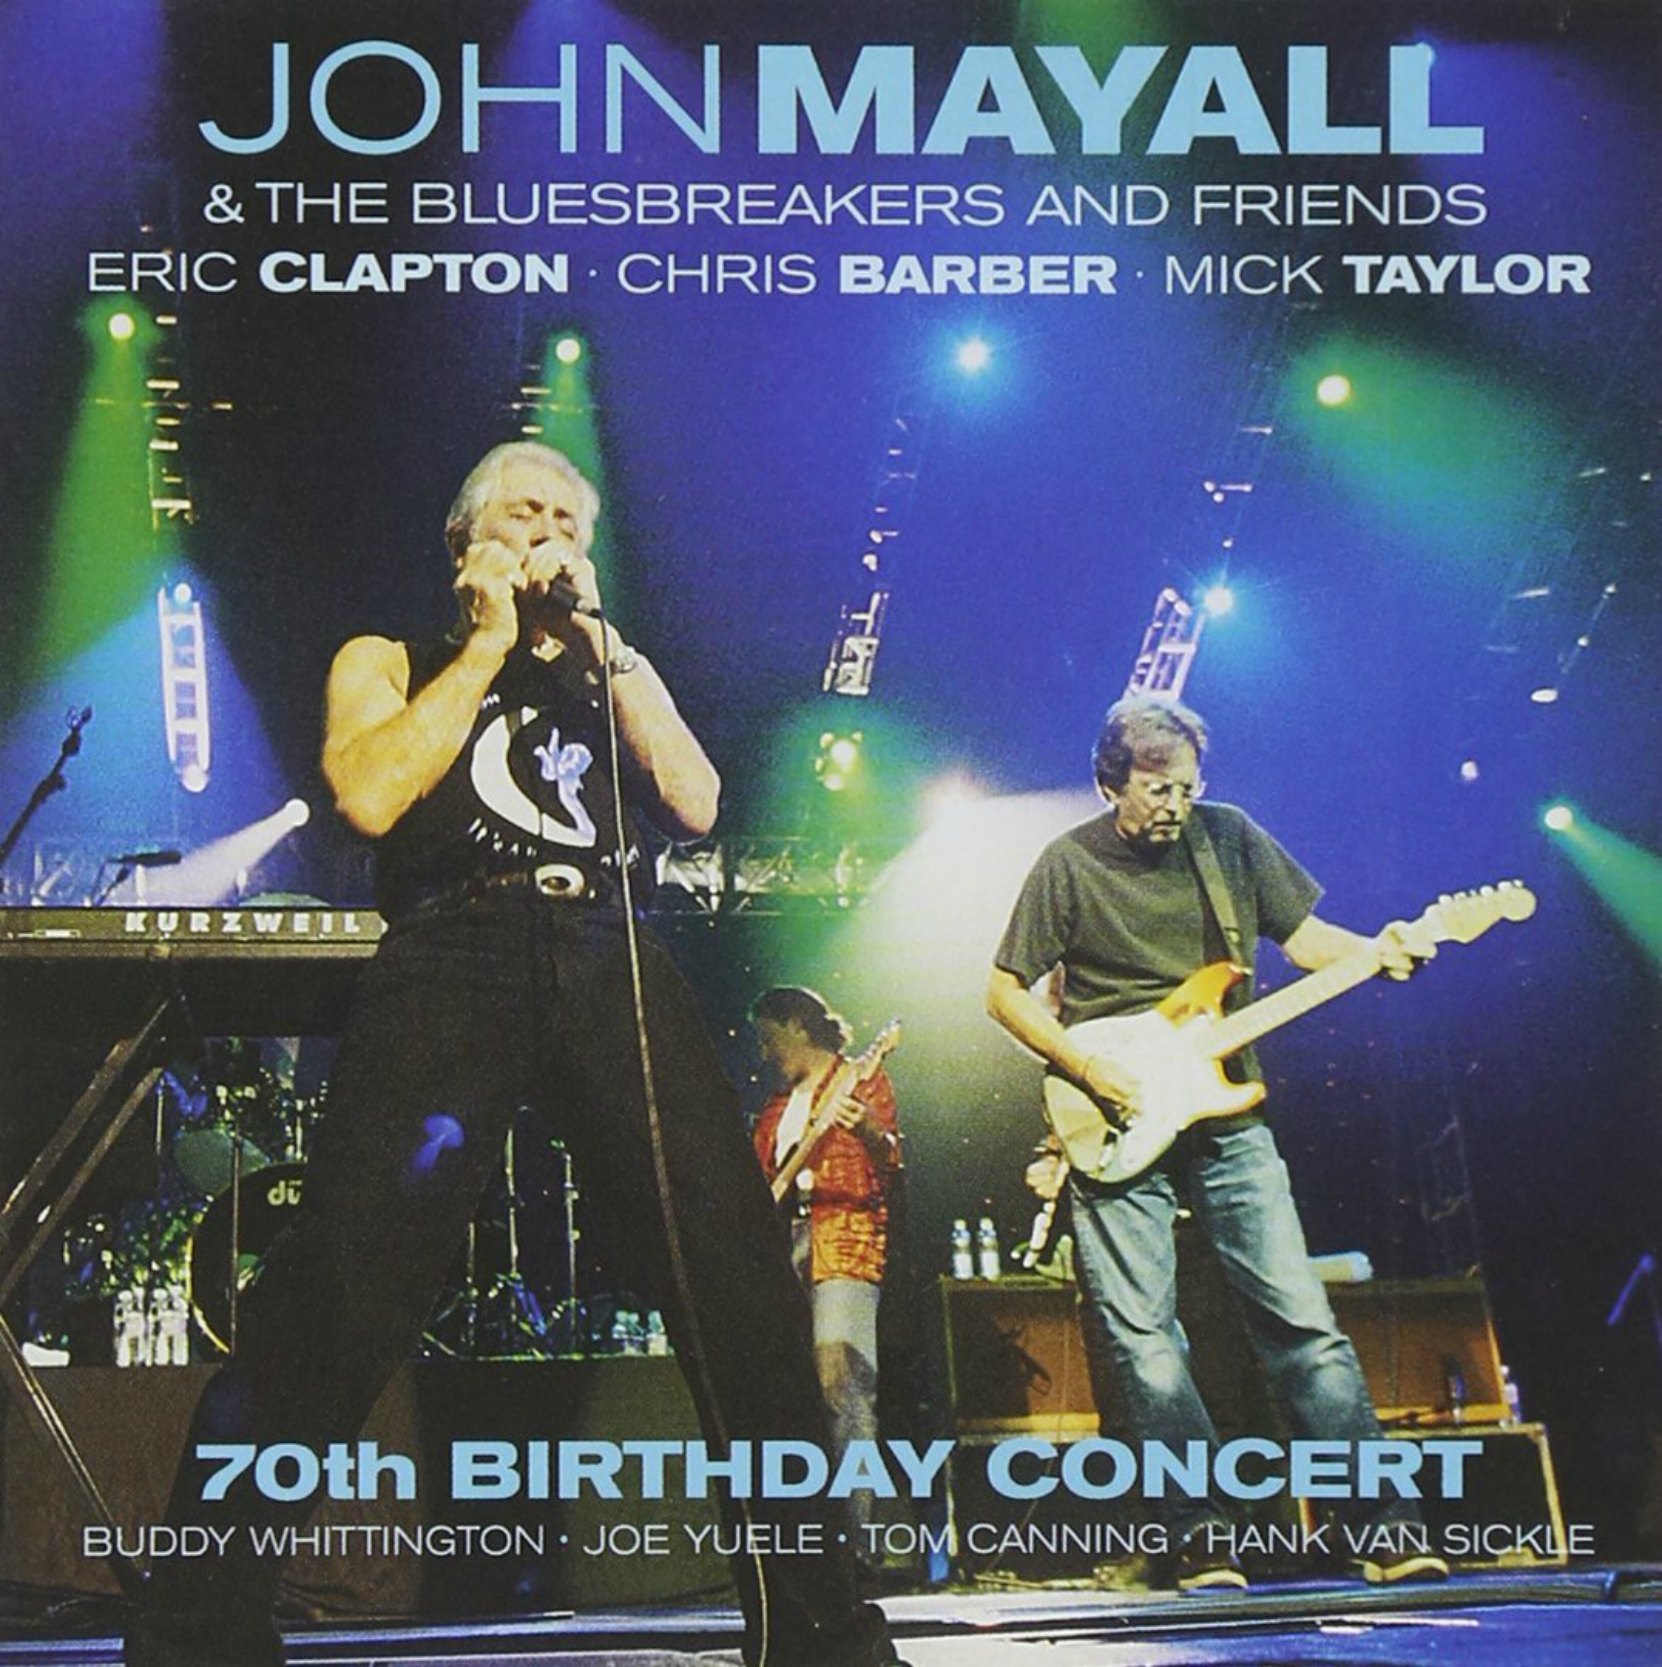 Album cover, John Mayall and the Bluesbreakers and Friends, 70th Birthday Concert, released in 2003